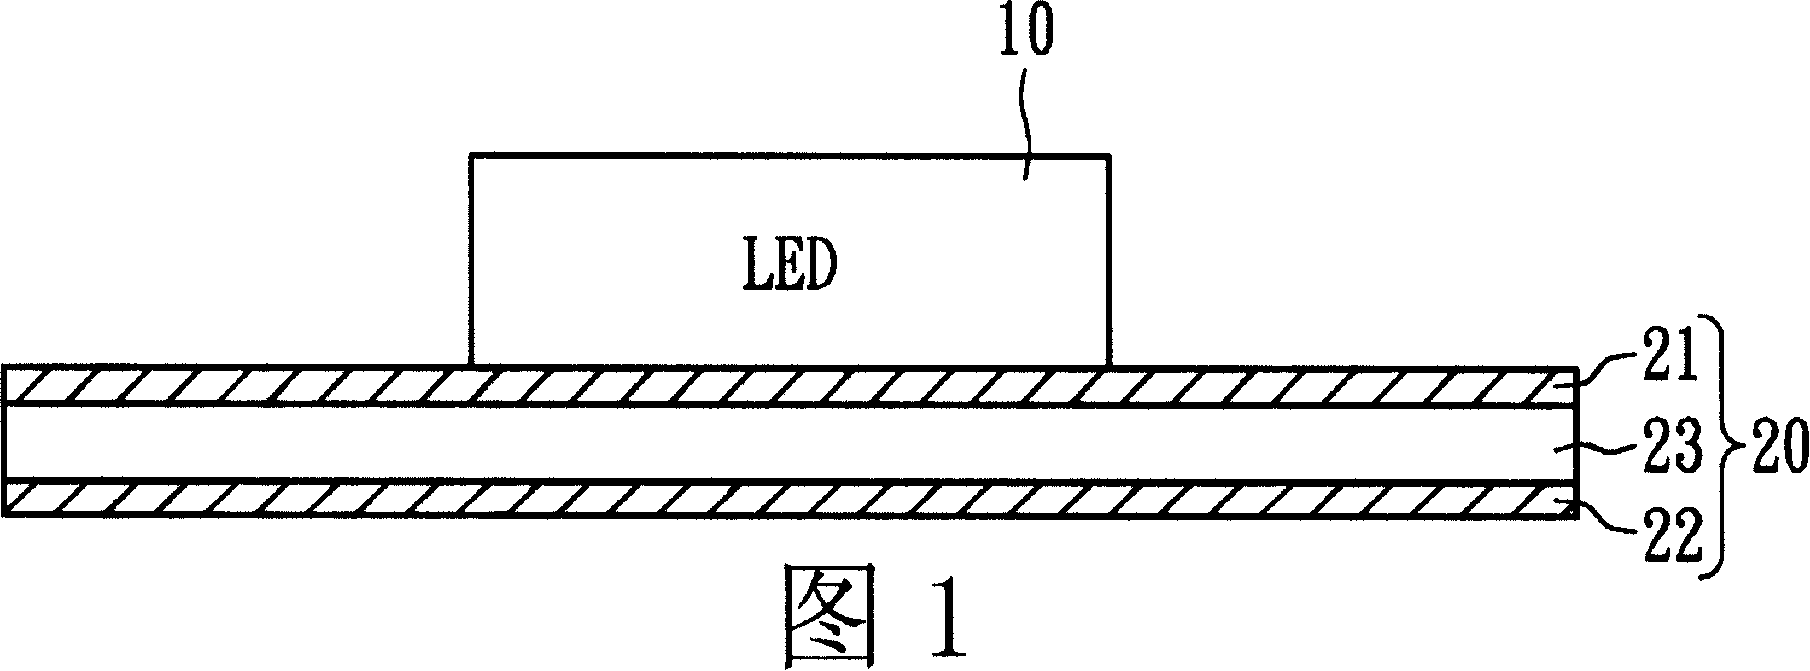 Heat radiation substrate of electronic element